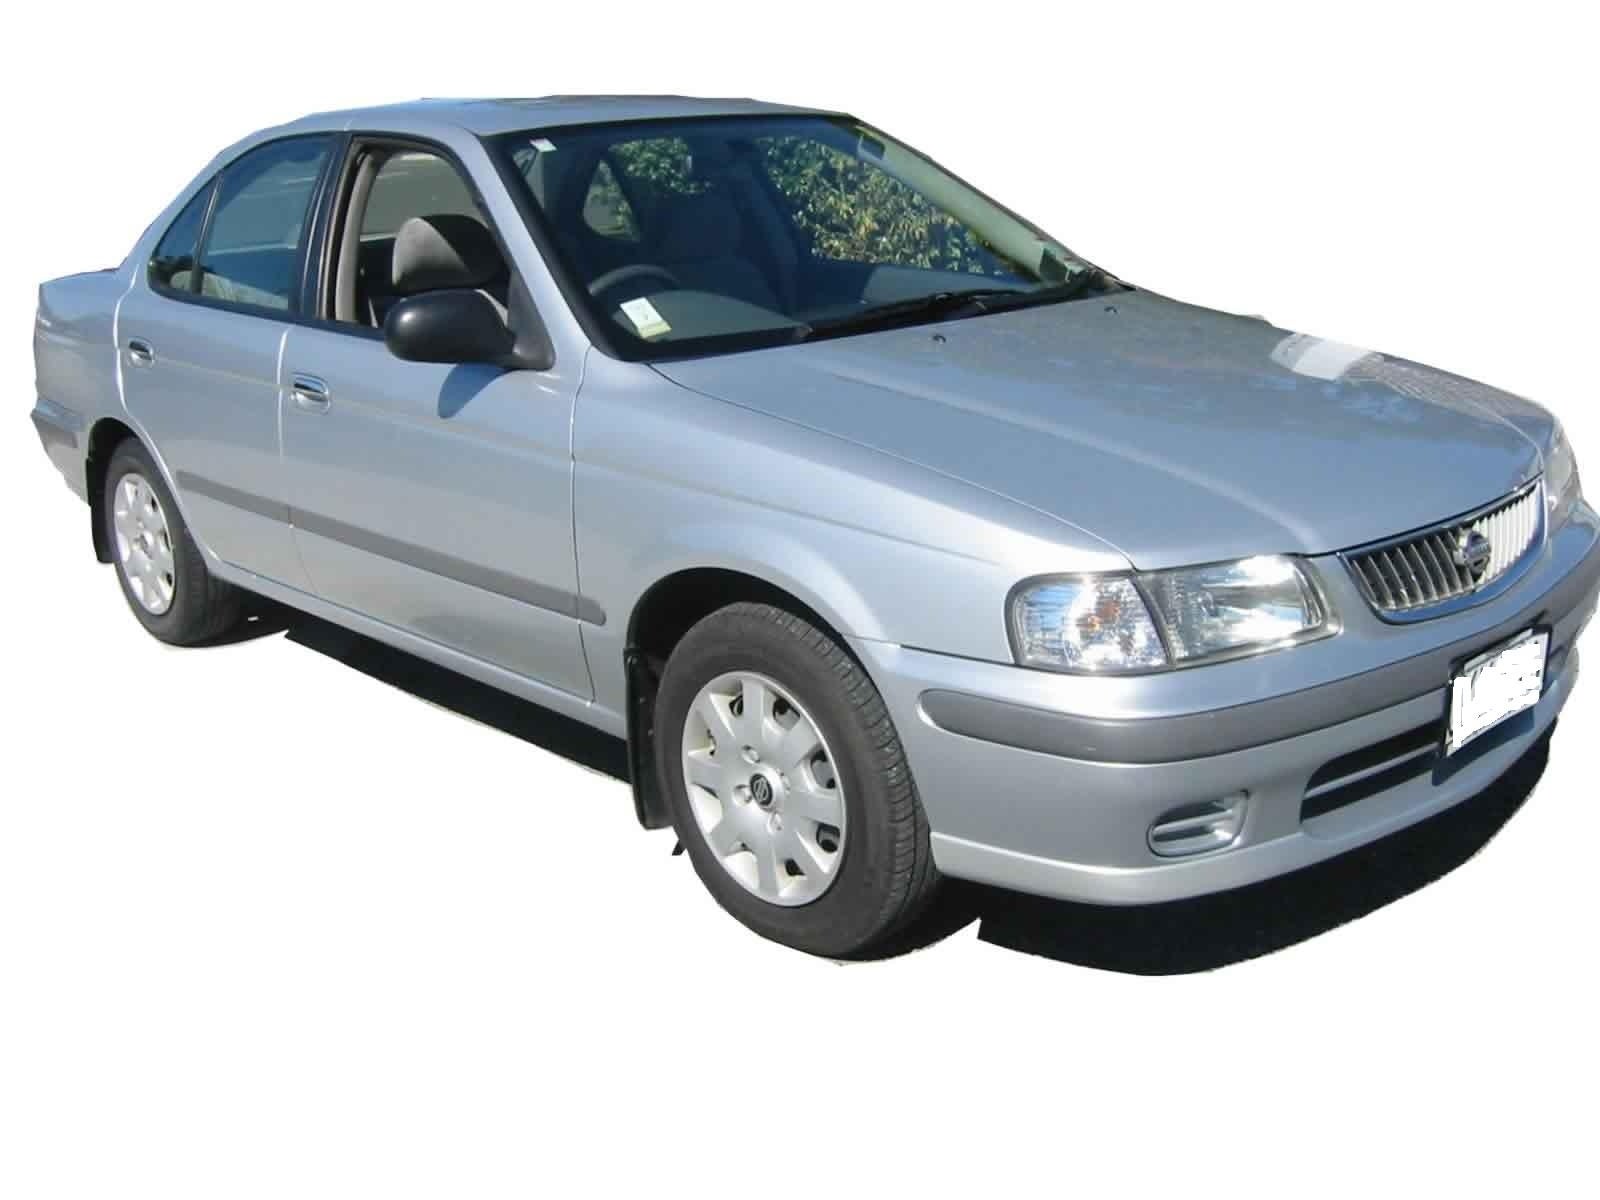 2002 Nissan Sunny Test Drive Review - CarGurus